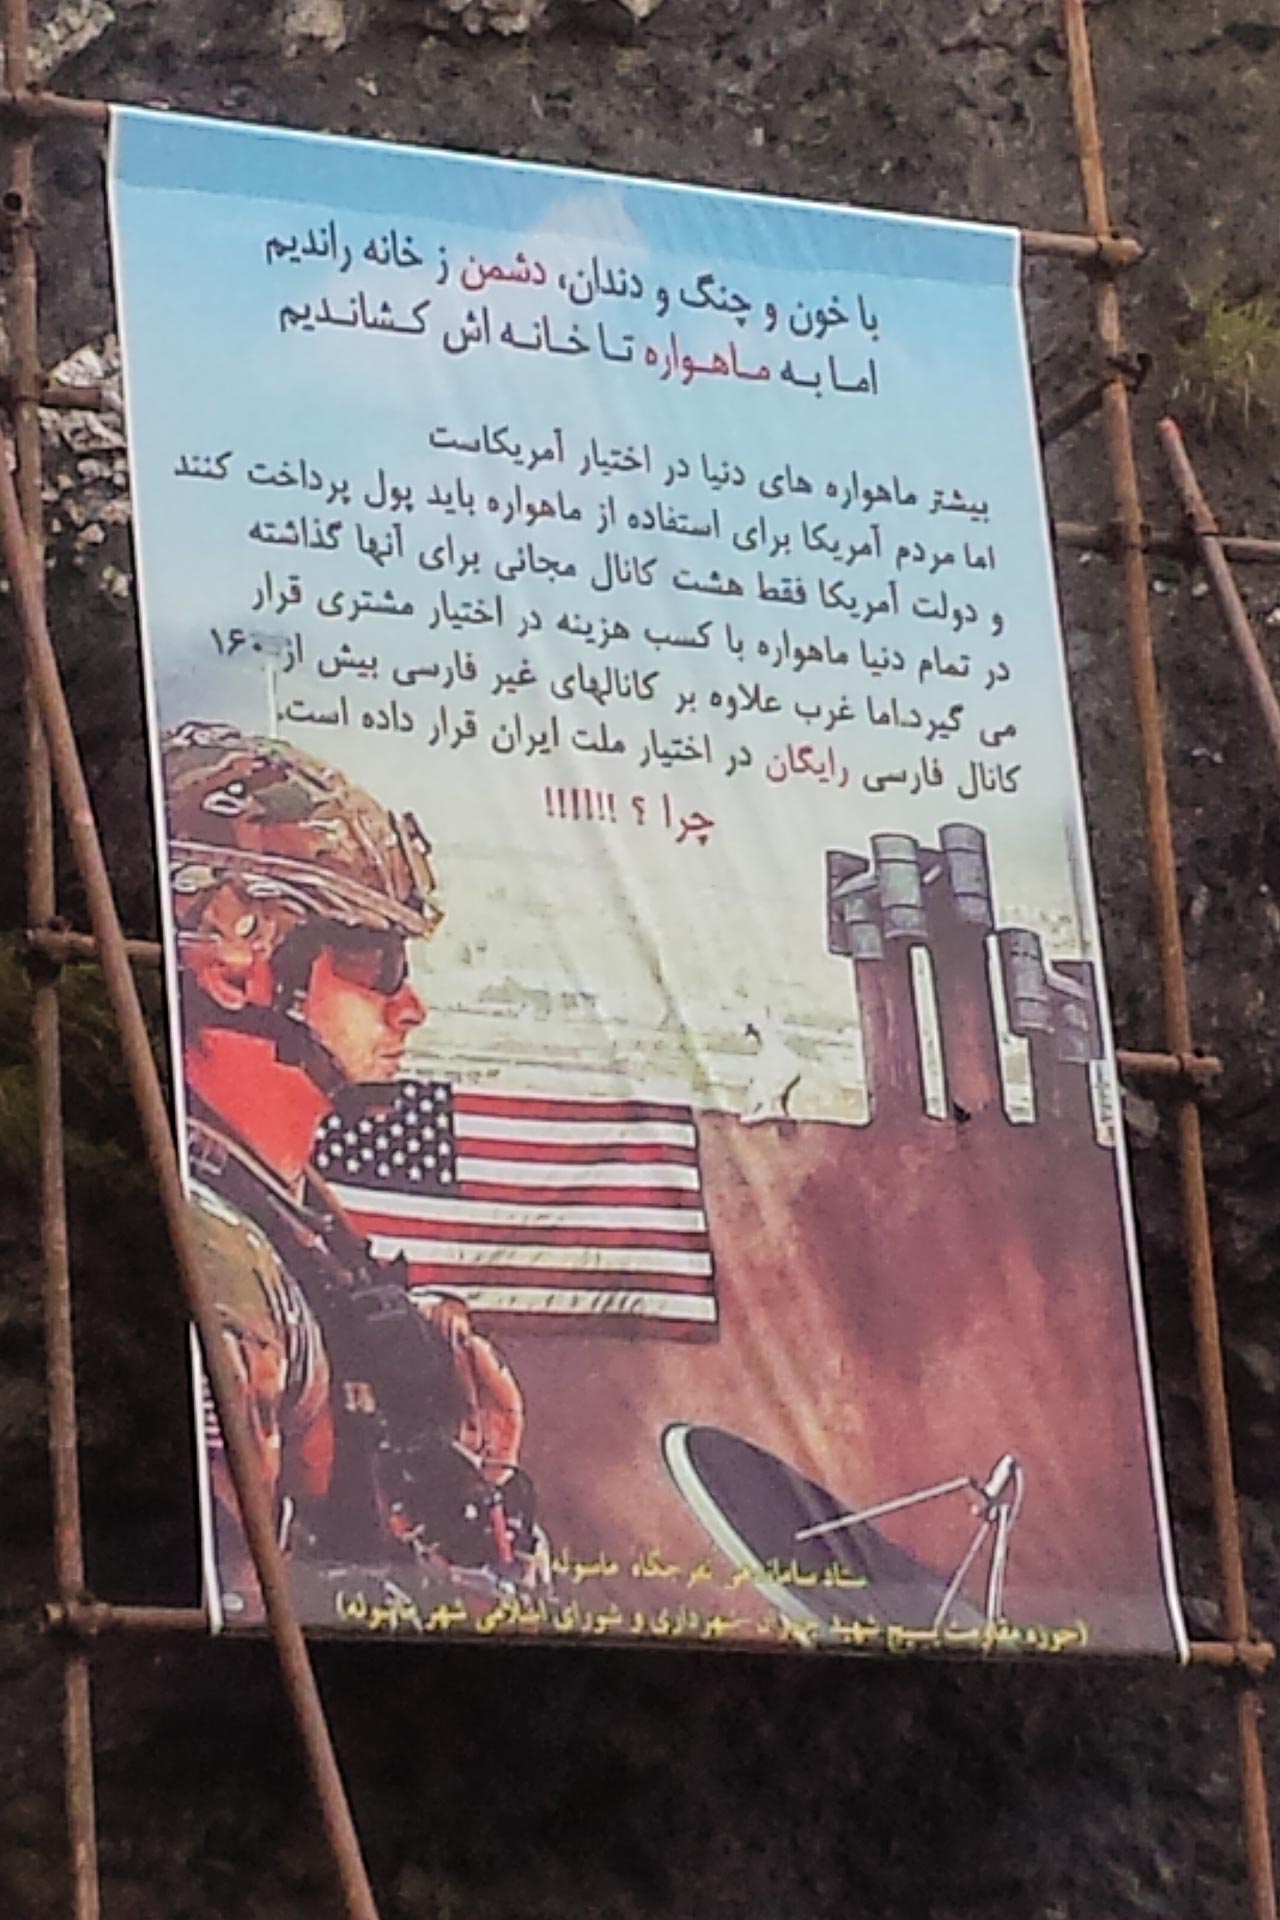 sign in Farsi, in Iran, saying about the USA